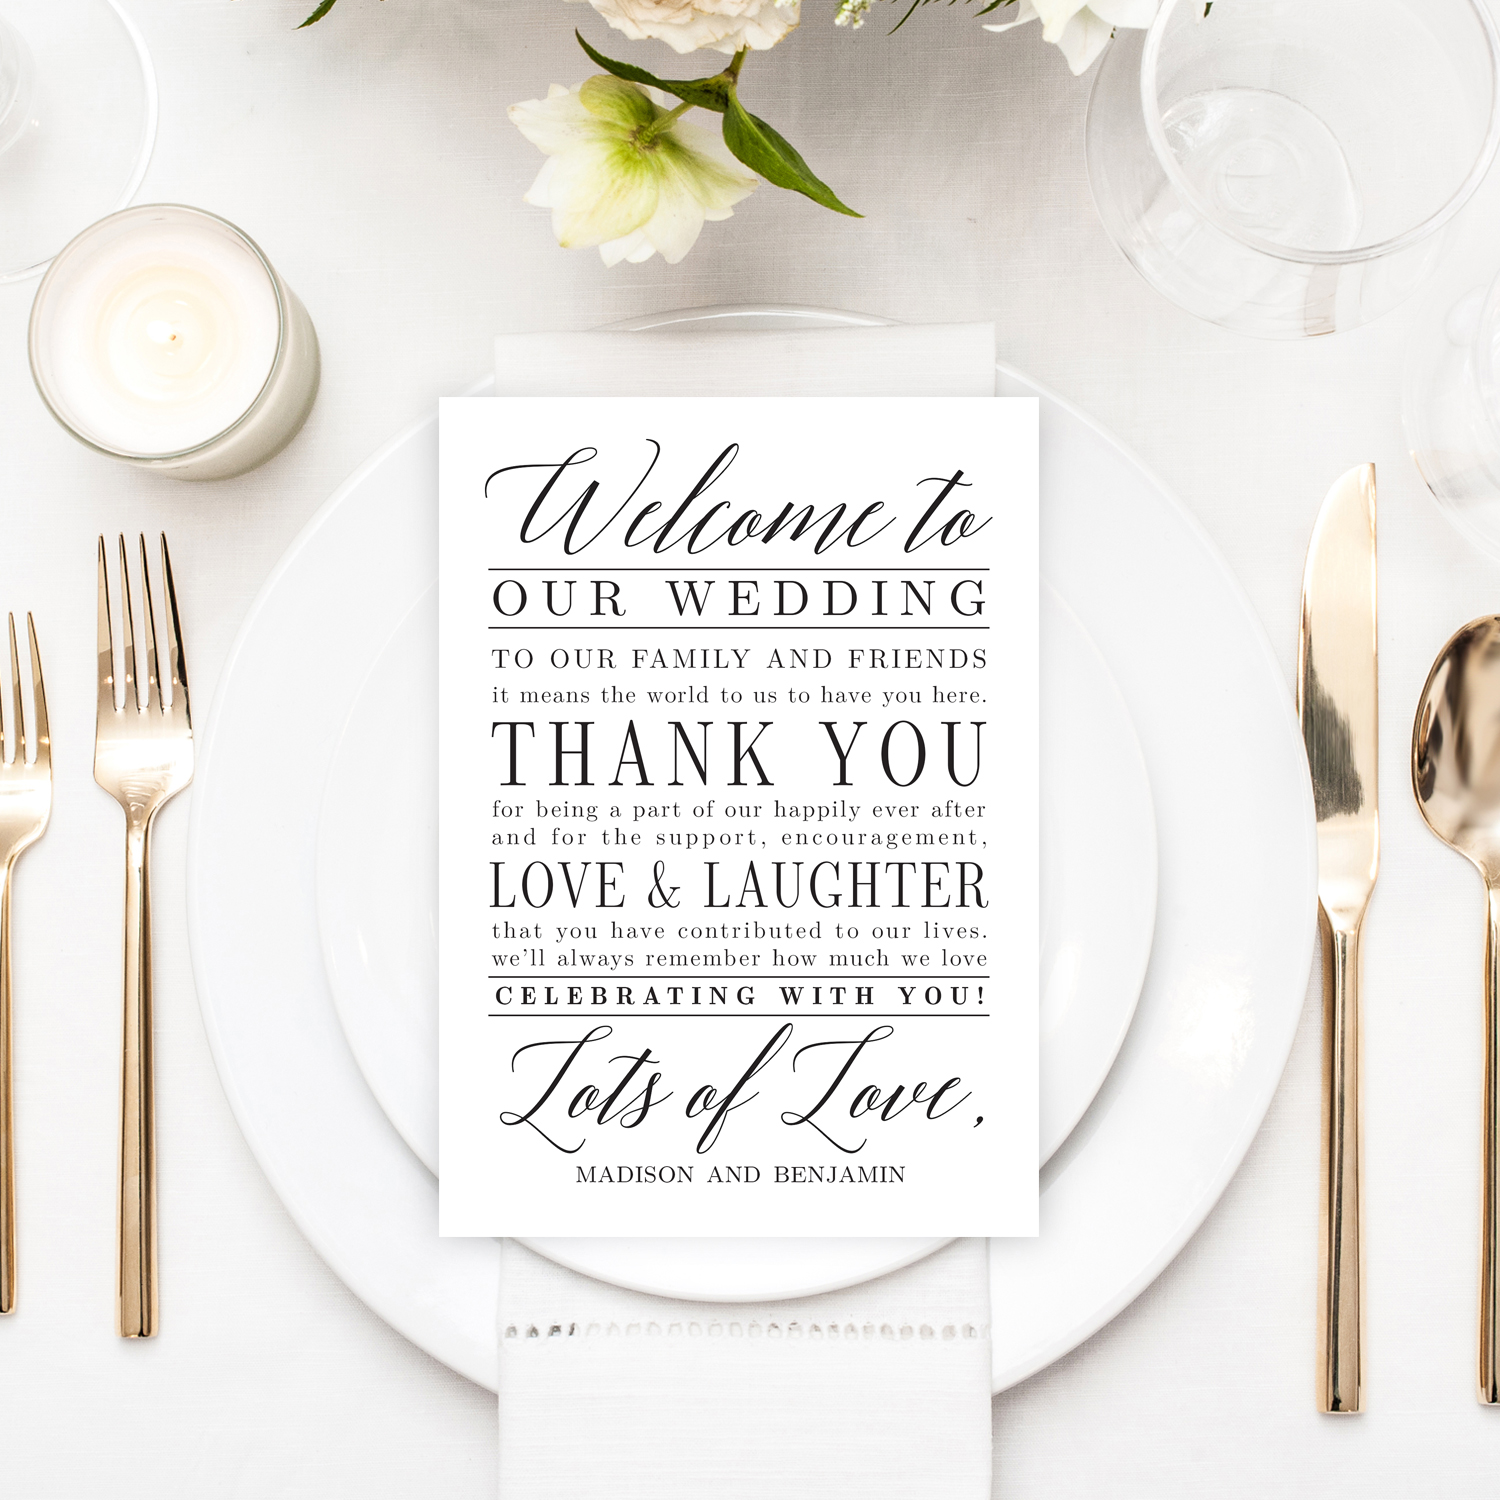  Welcome! Thanks for Celebrating Wedding Tags on Kraft